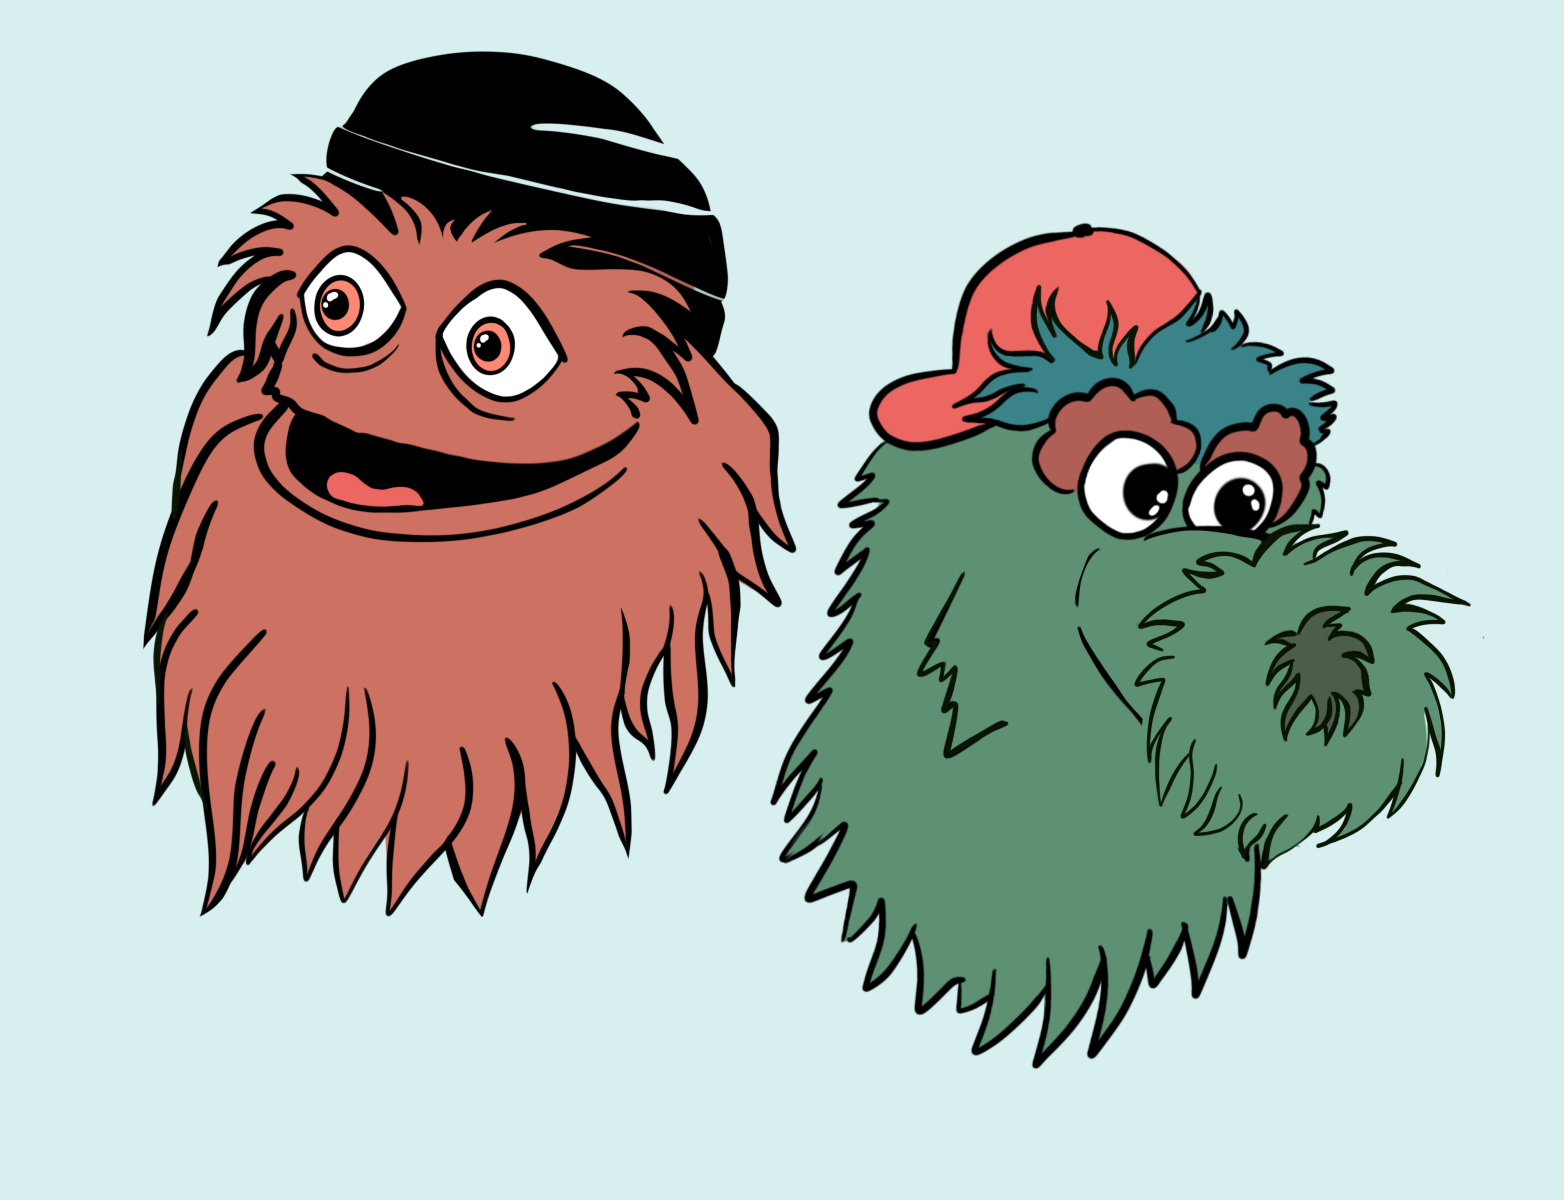 Gritty & the Phanatic by Emily Gilmore on Dribbble